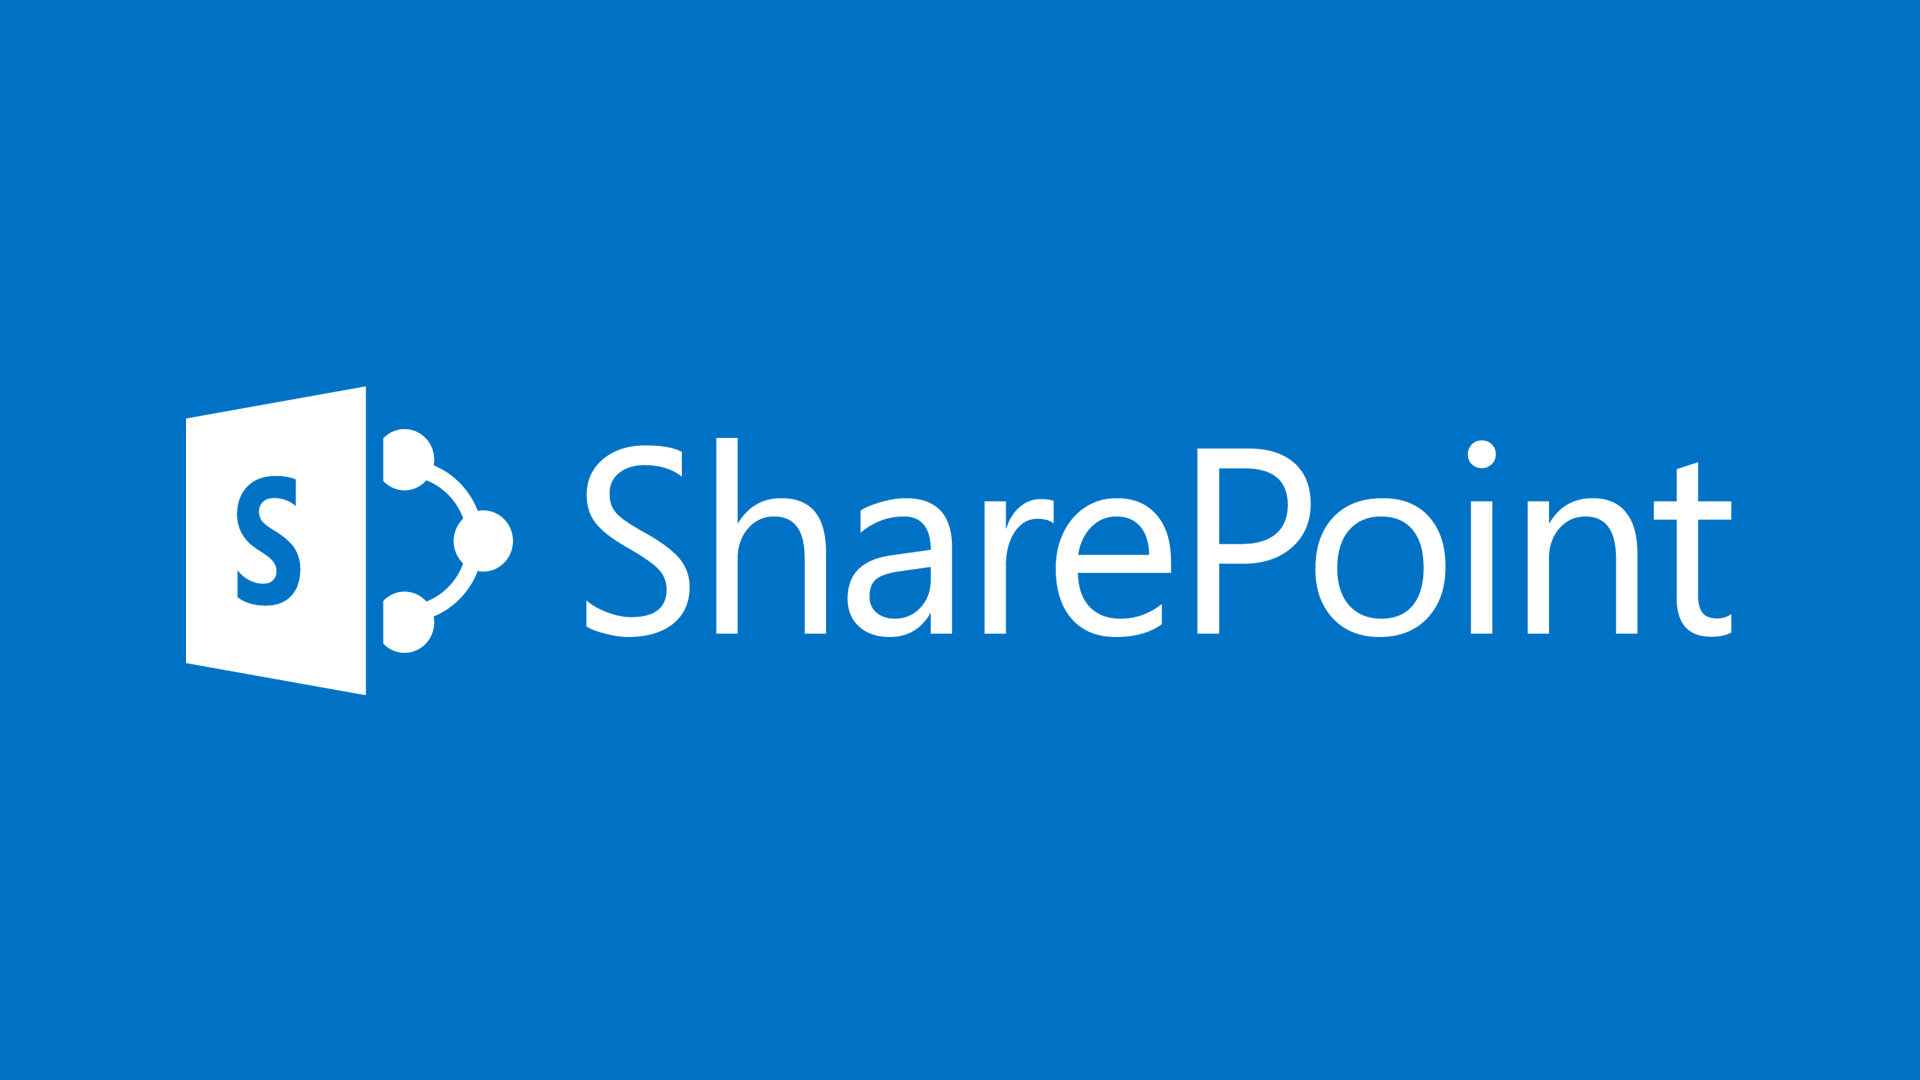 Why We Have to Use SharePoint?